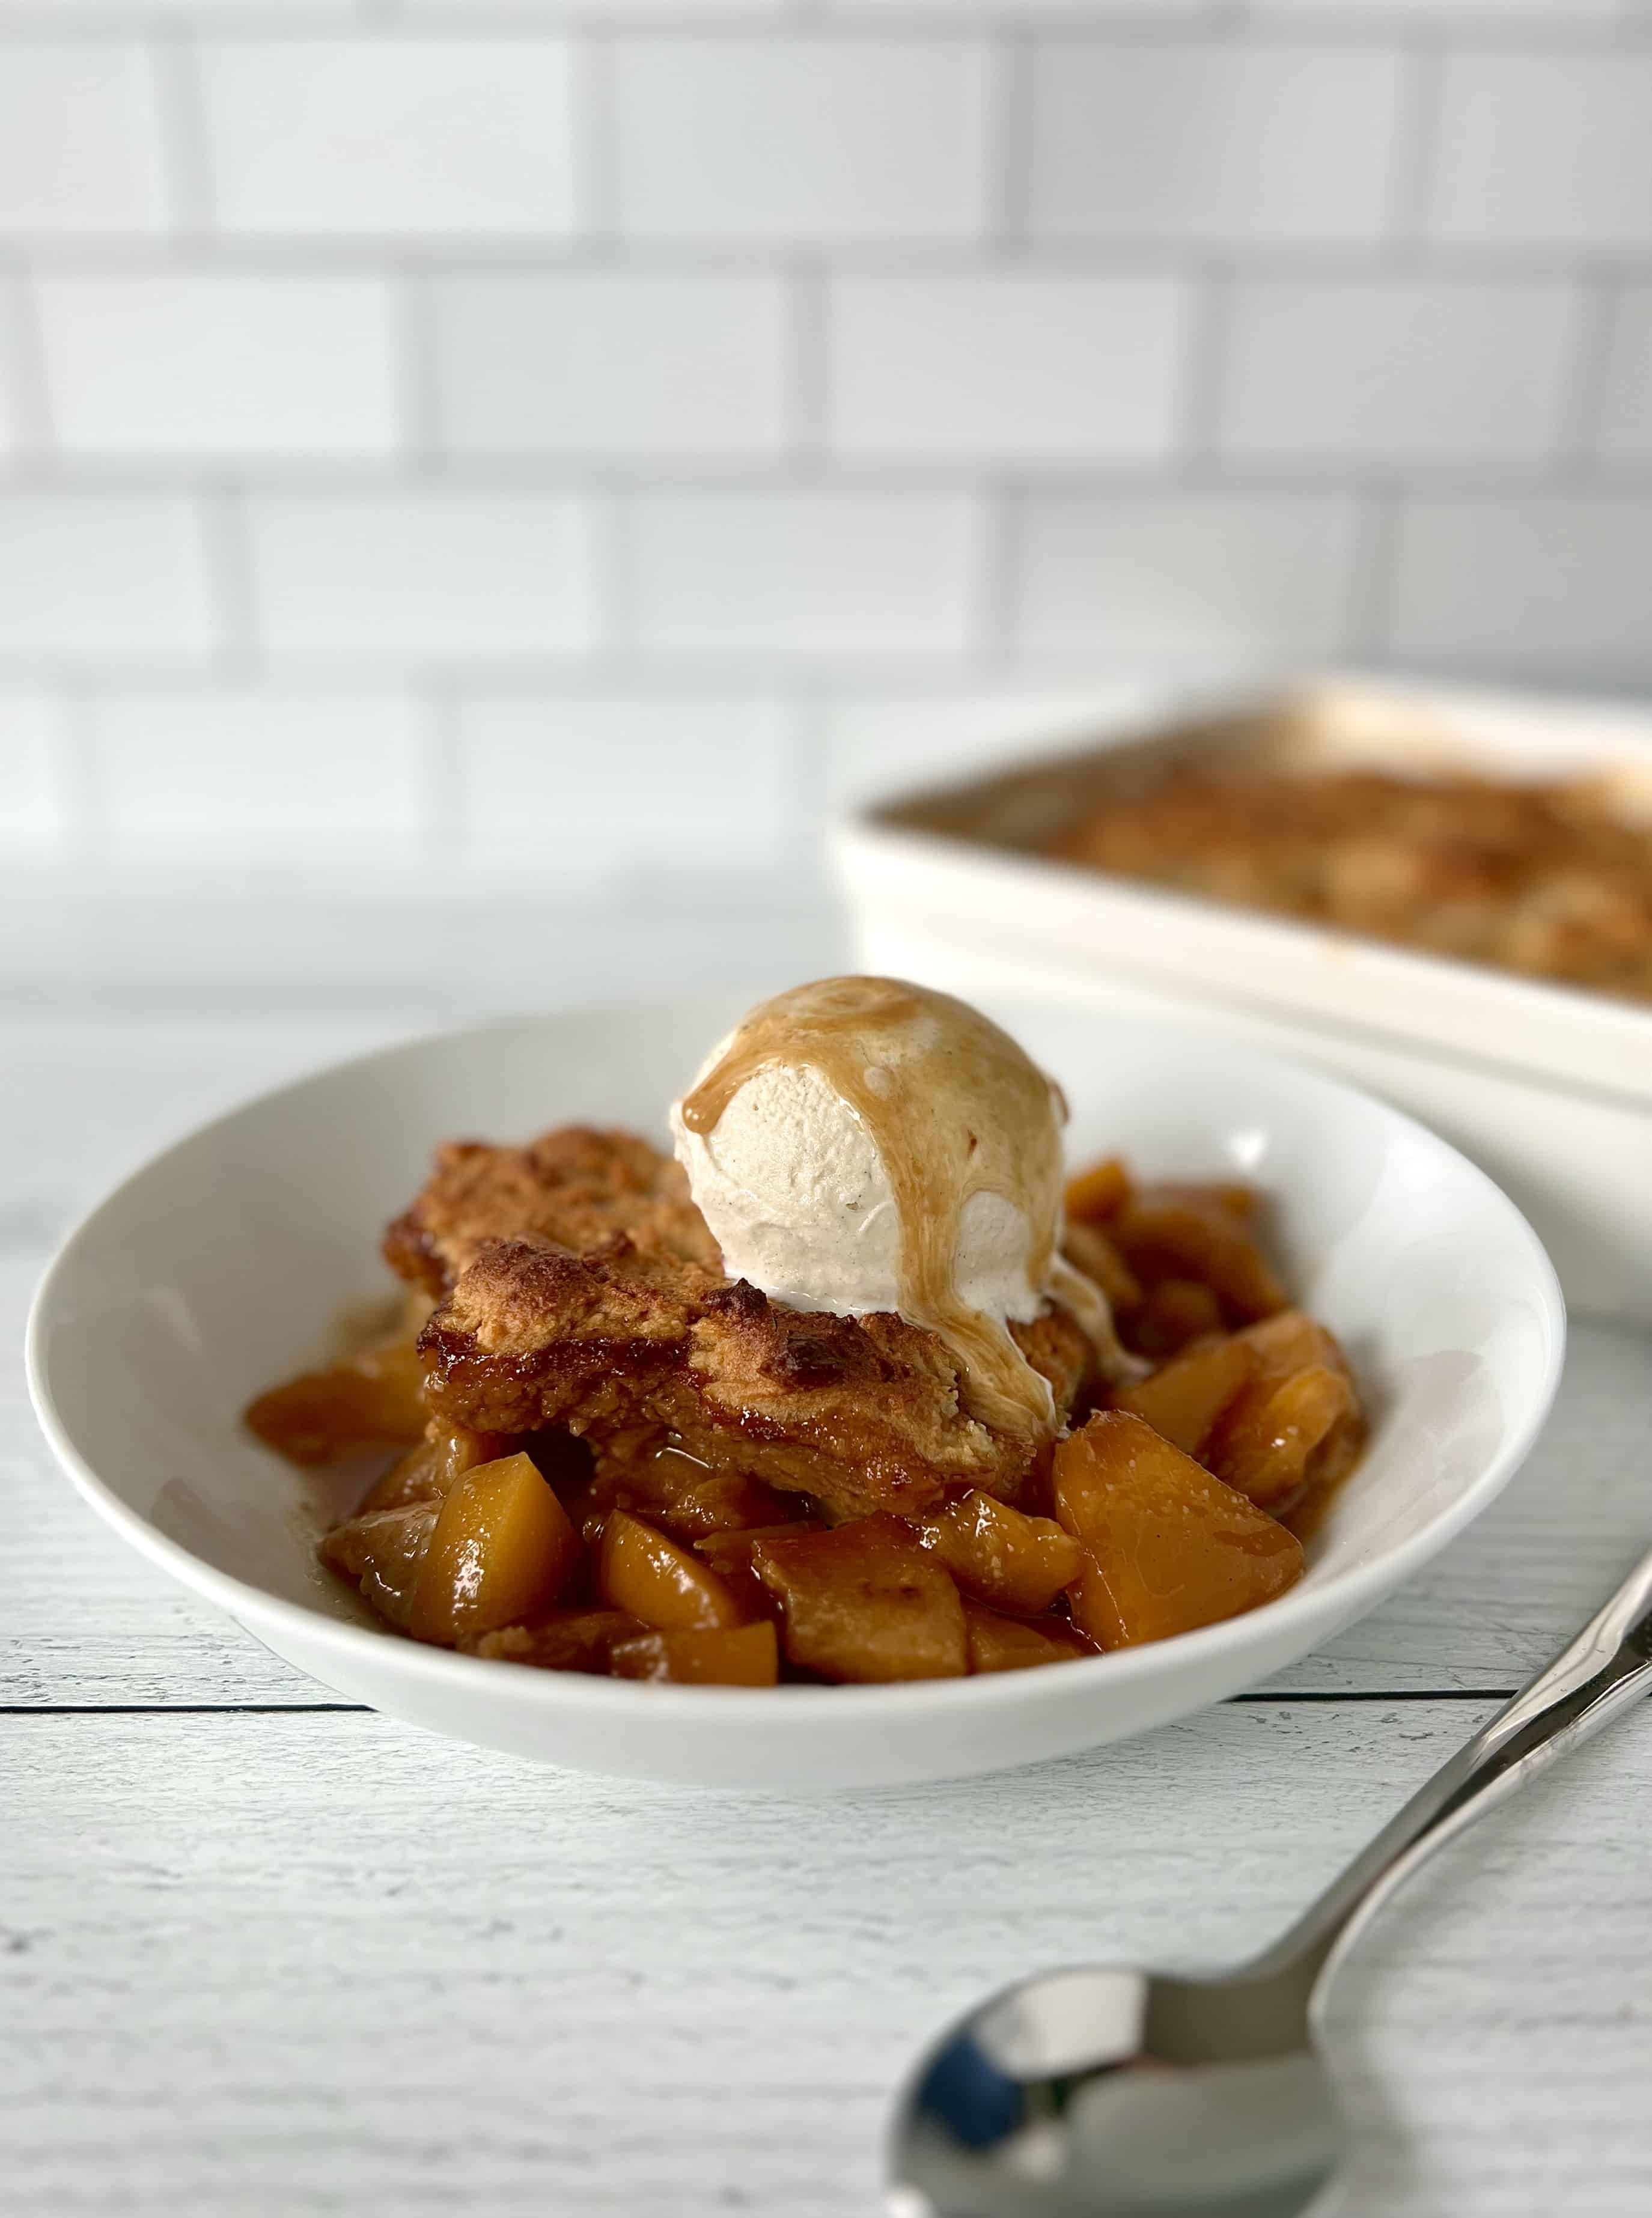 Paleo cobbler in a white bowl with ice cream on top and sauce drizzled over the ice cream.